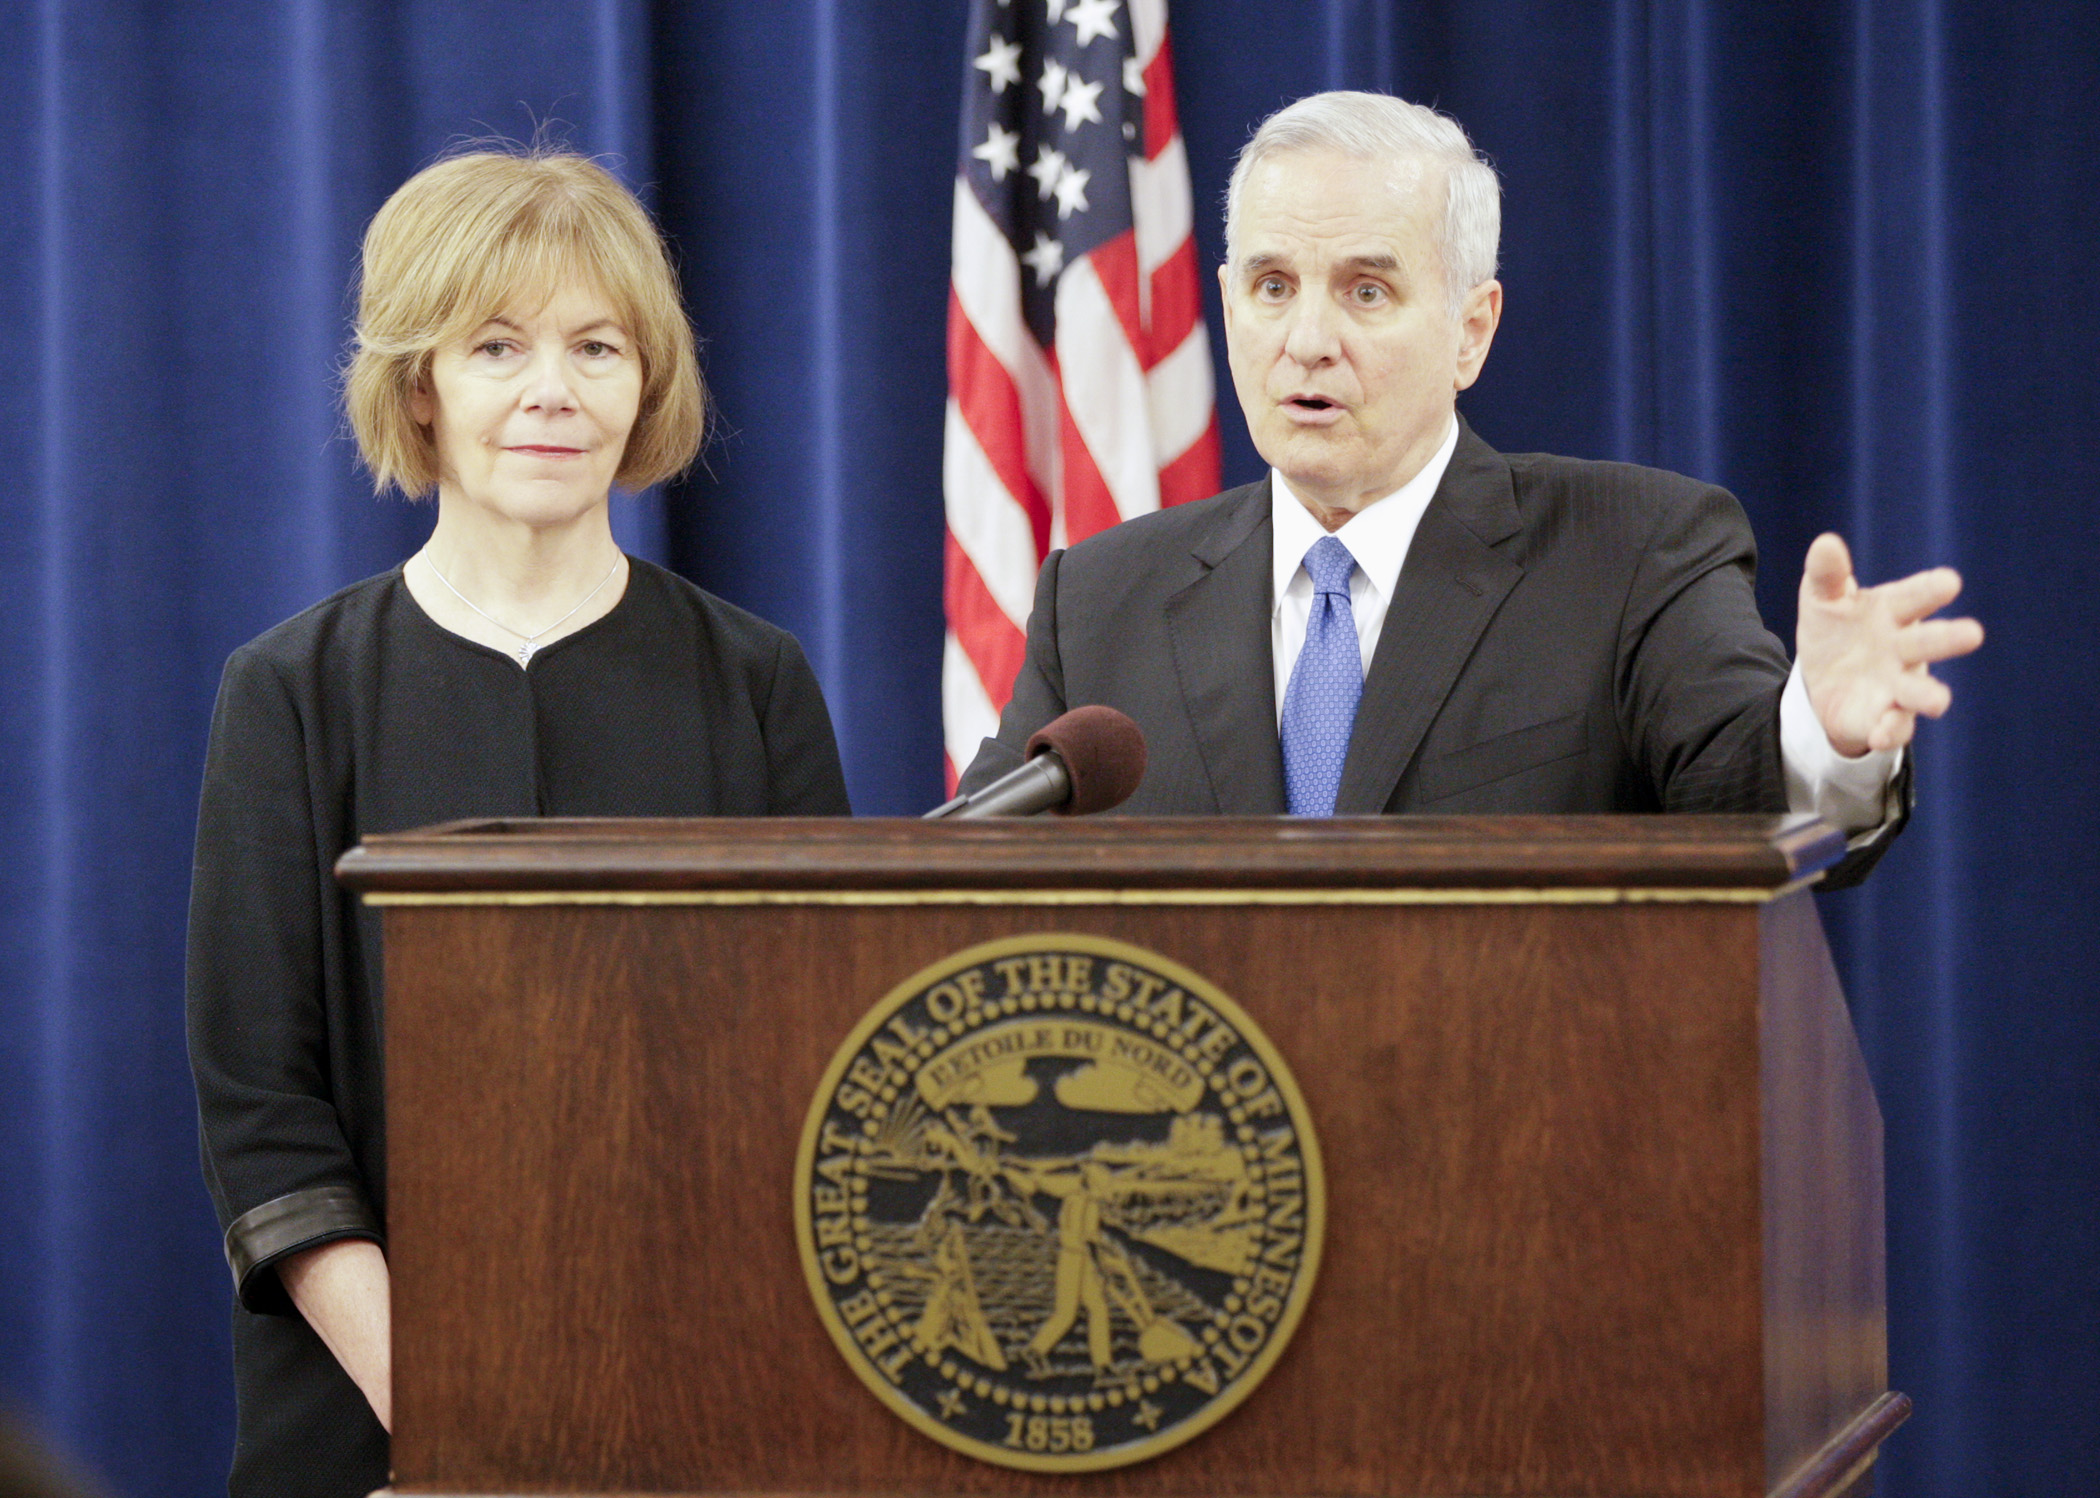 Gov. Mark Dayton at a May 16 news conference. House Photography file photo